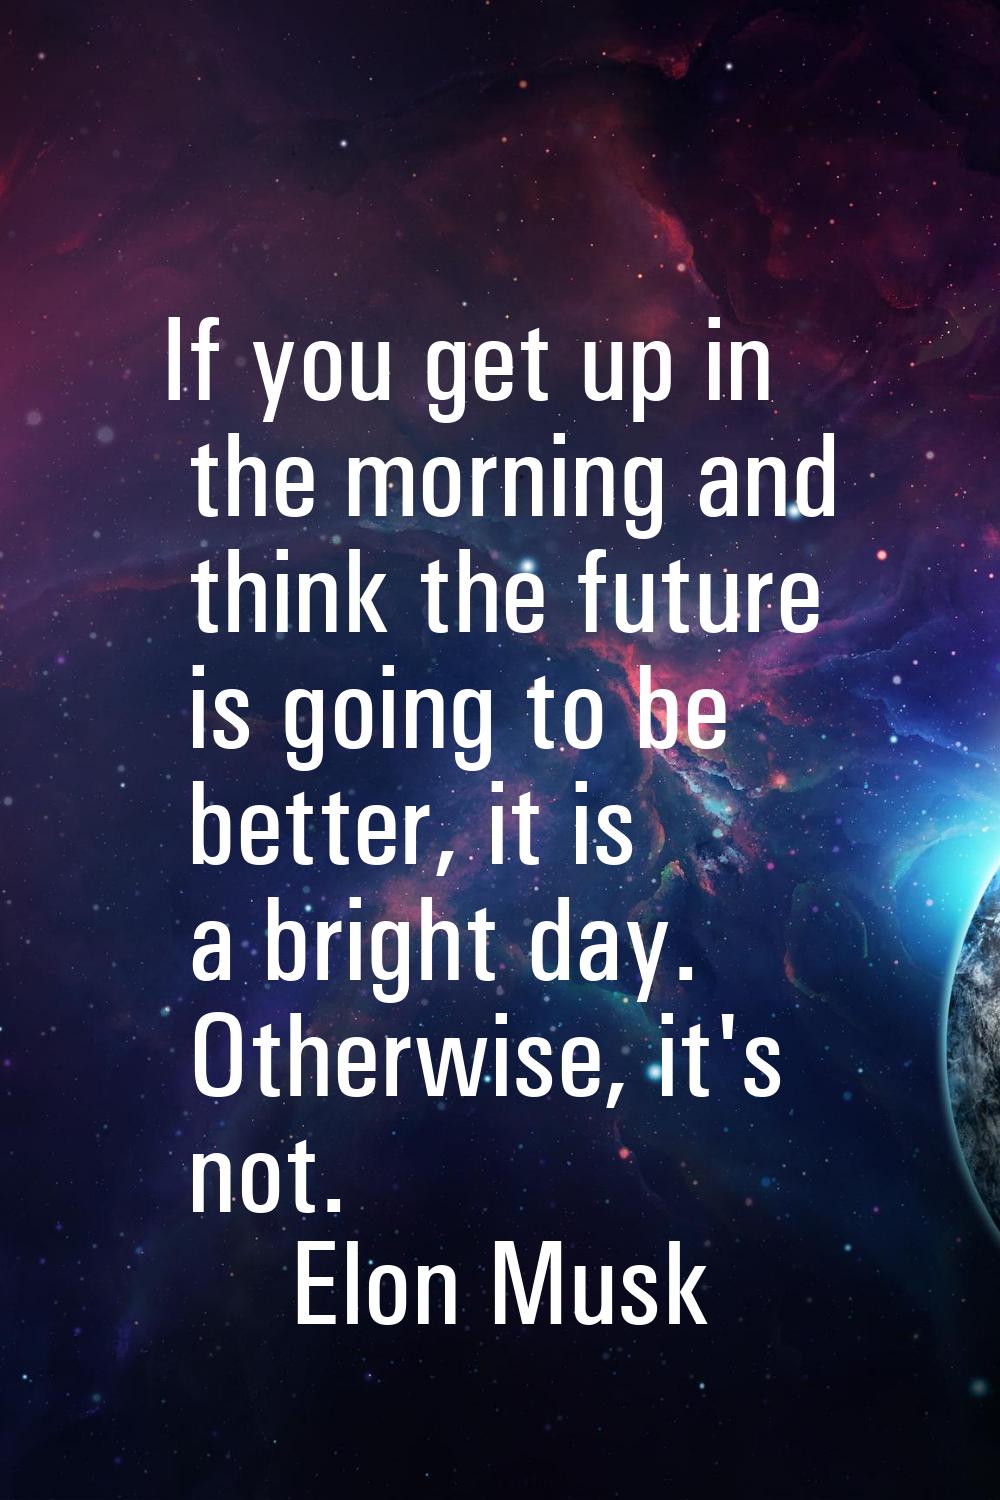 If you get up in the morning and think the future is going to be better, it is a bright day. Otherw